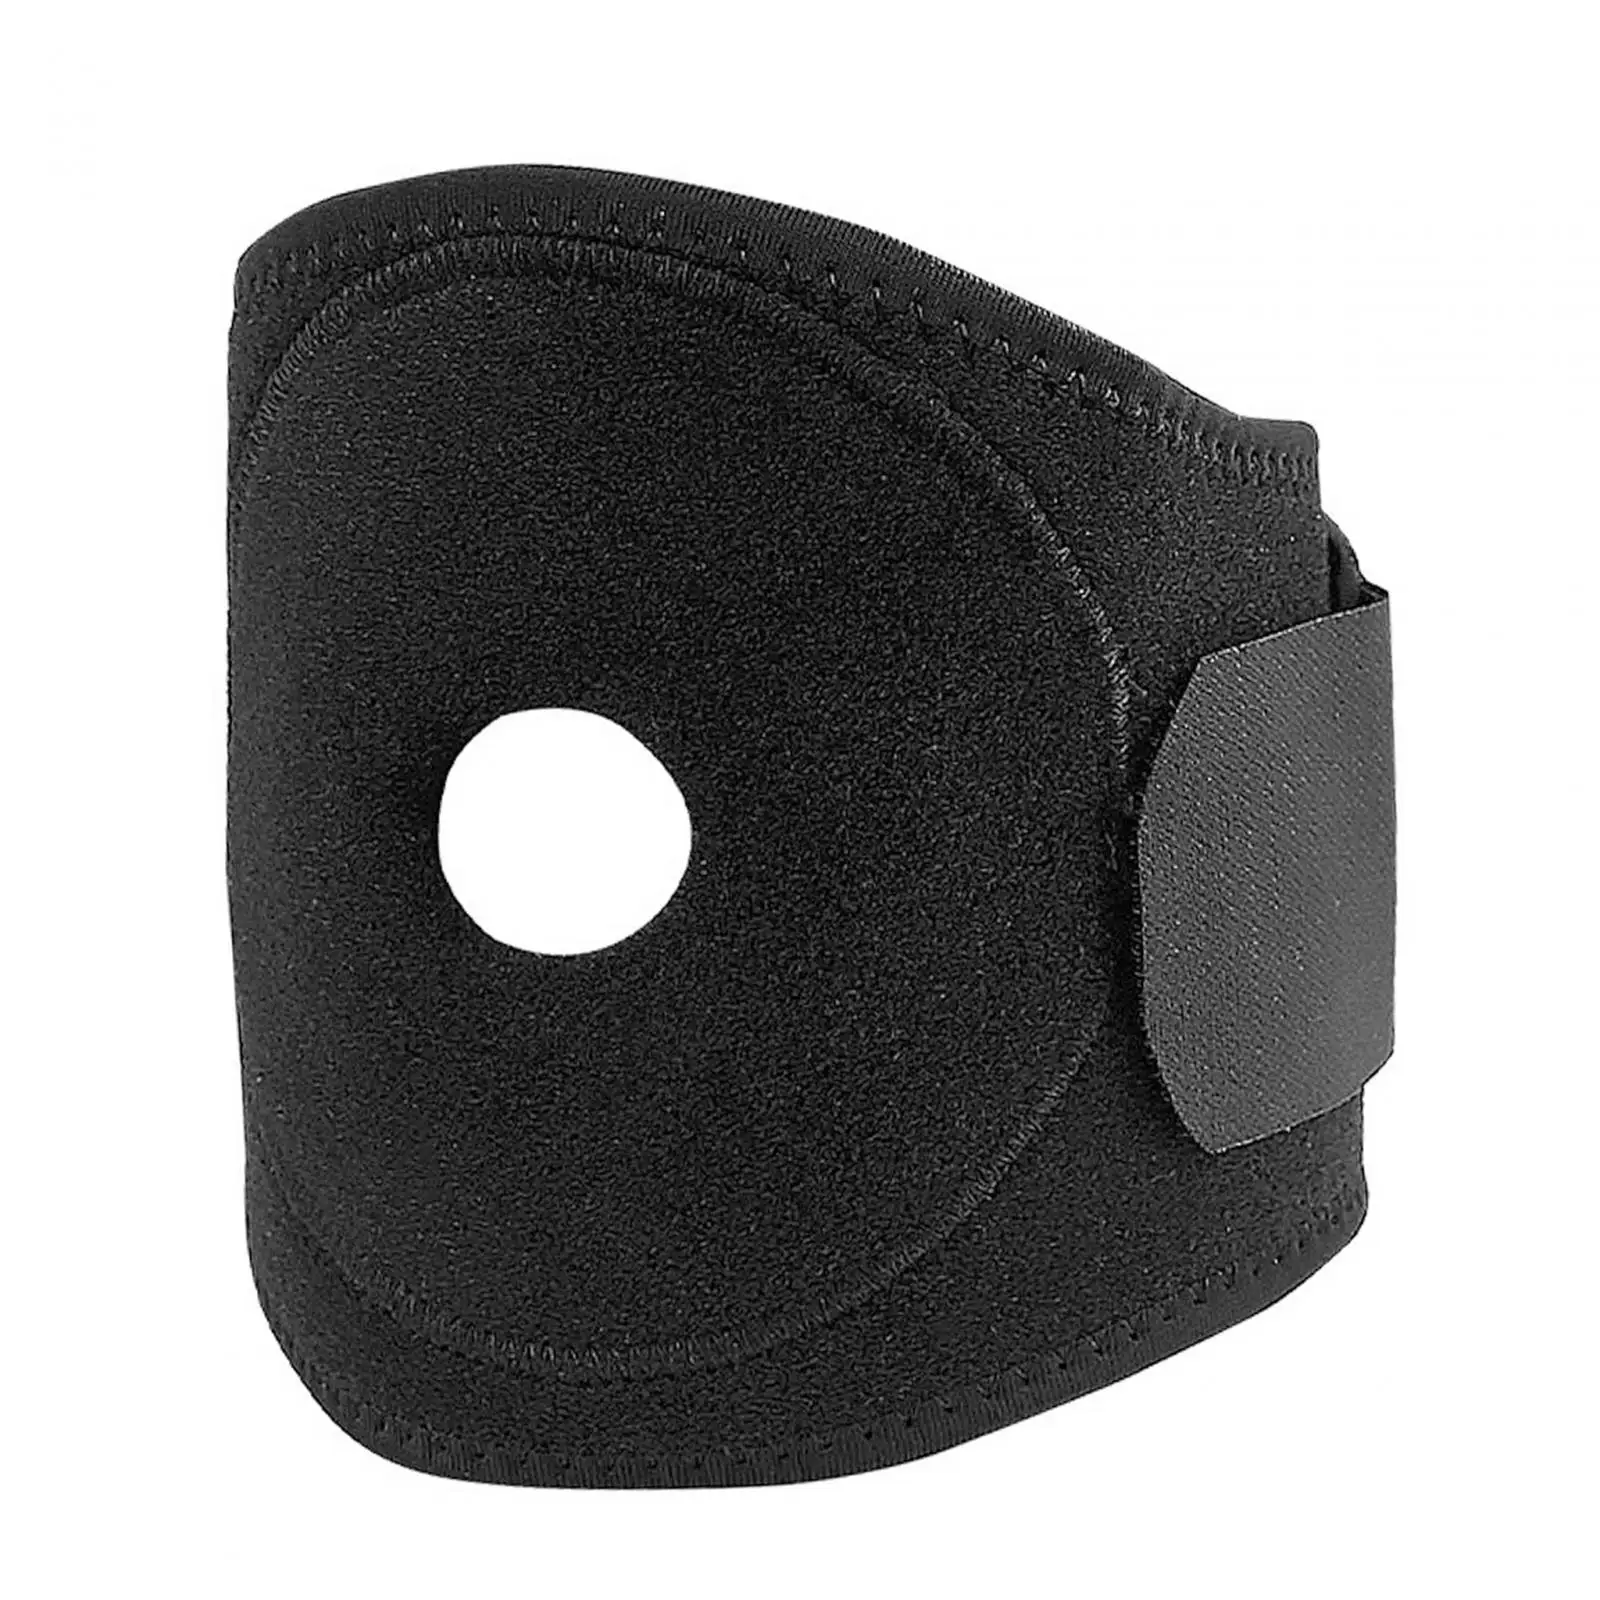 Kneepad with Foldable Aluminum Plate Portable Stable Thickening Knee Support Sleeve for Running Cycling Soccer Volleyball Hiking